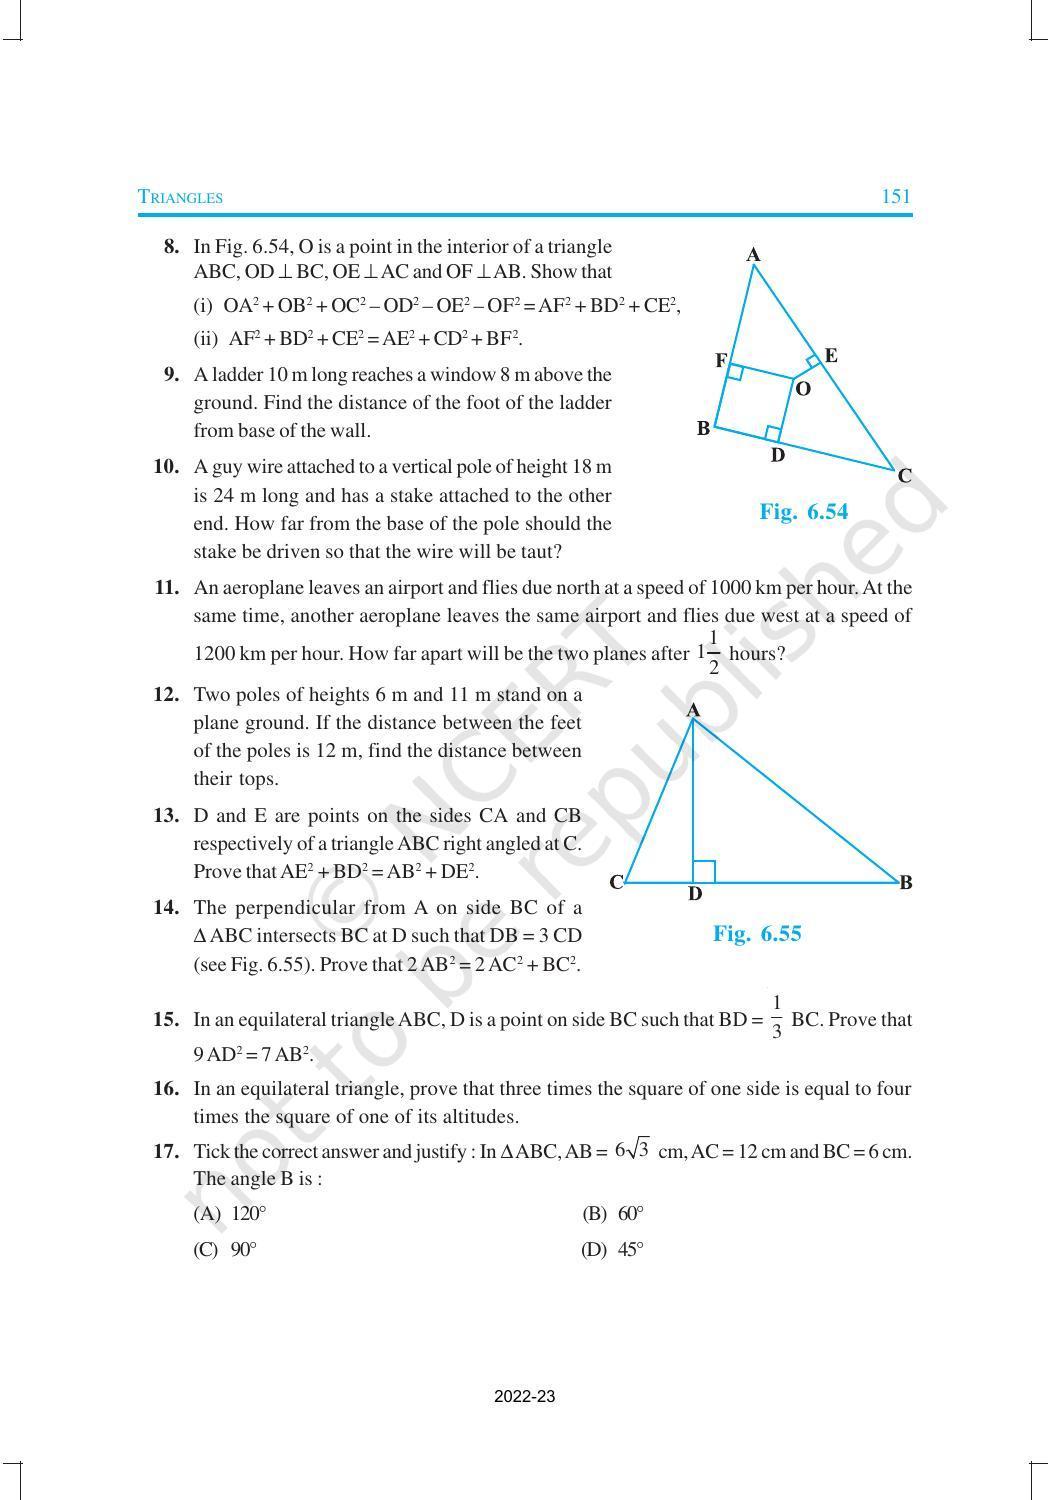 NCERT Book for Class 10 Maths Chapter 6 Triangles - Page 35